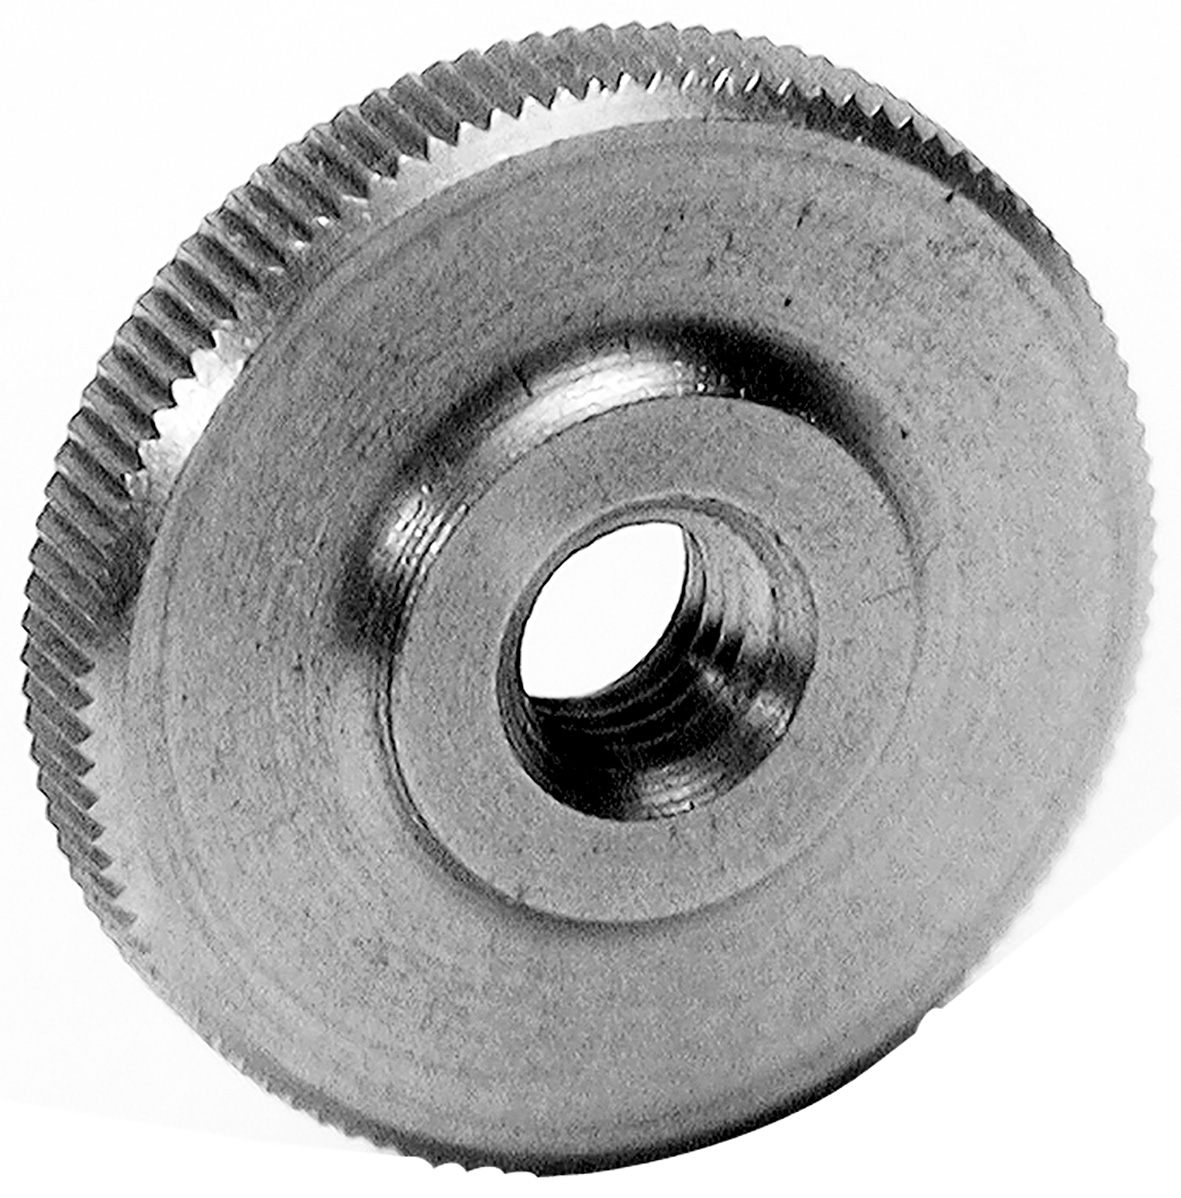 Stainless steel knurled thumb nut - Knurled - Din 467 - Low